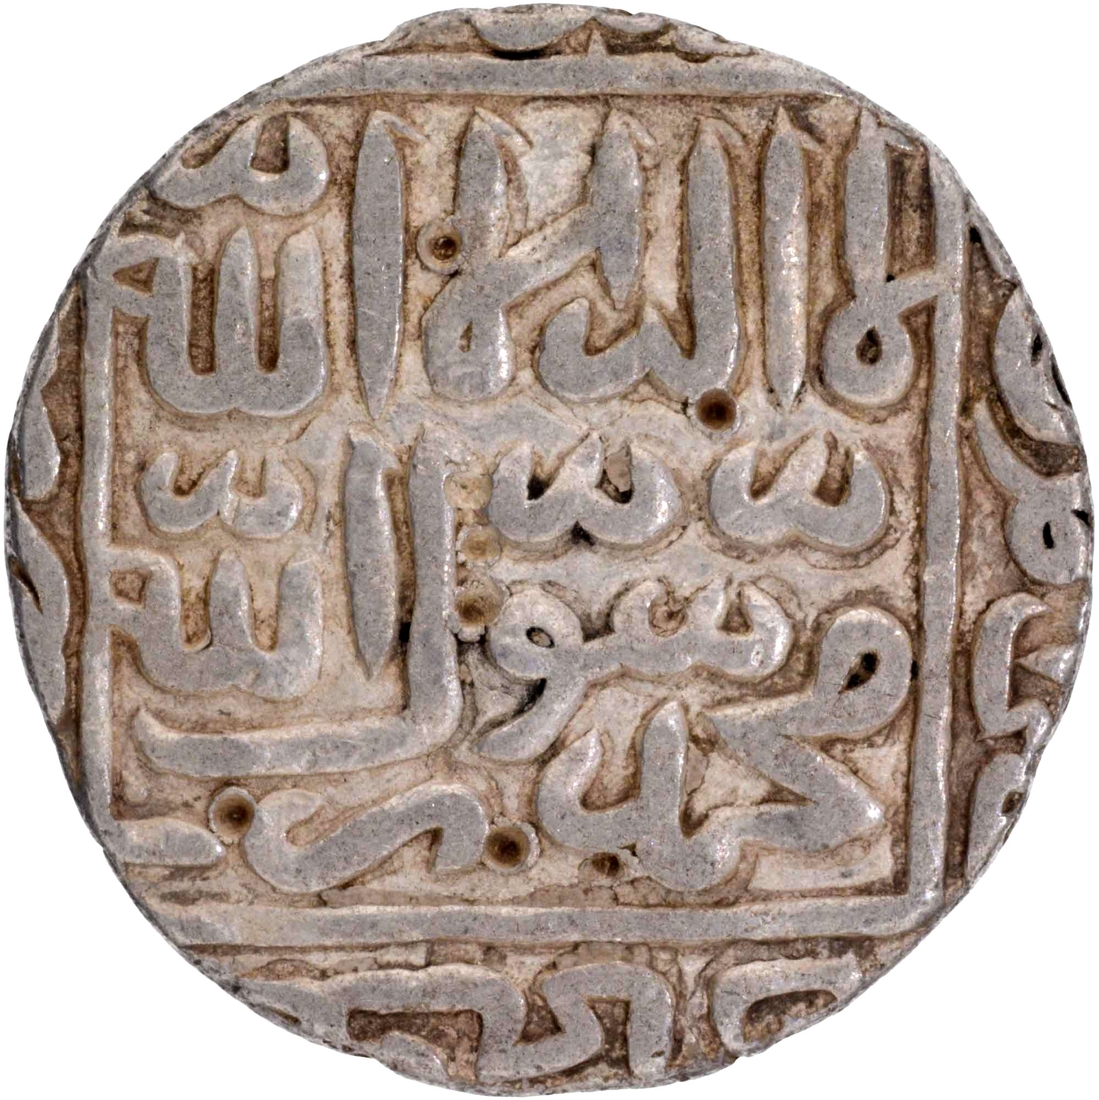 Rare Satgaon  Mint  Silver Rupee Coin of Ghiyath ud din Jalal of Dehli Sultanate.